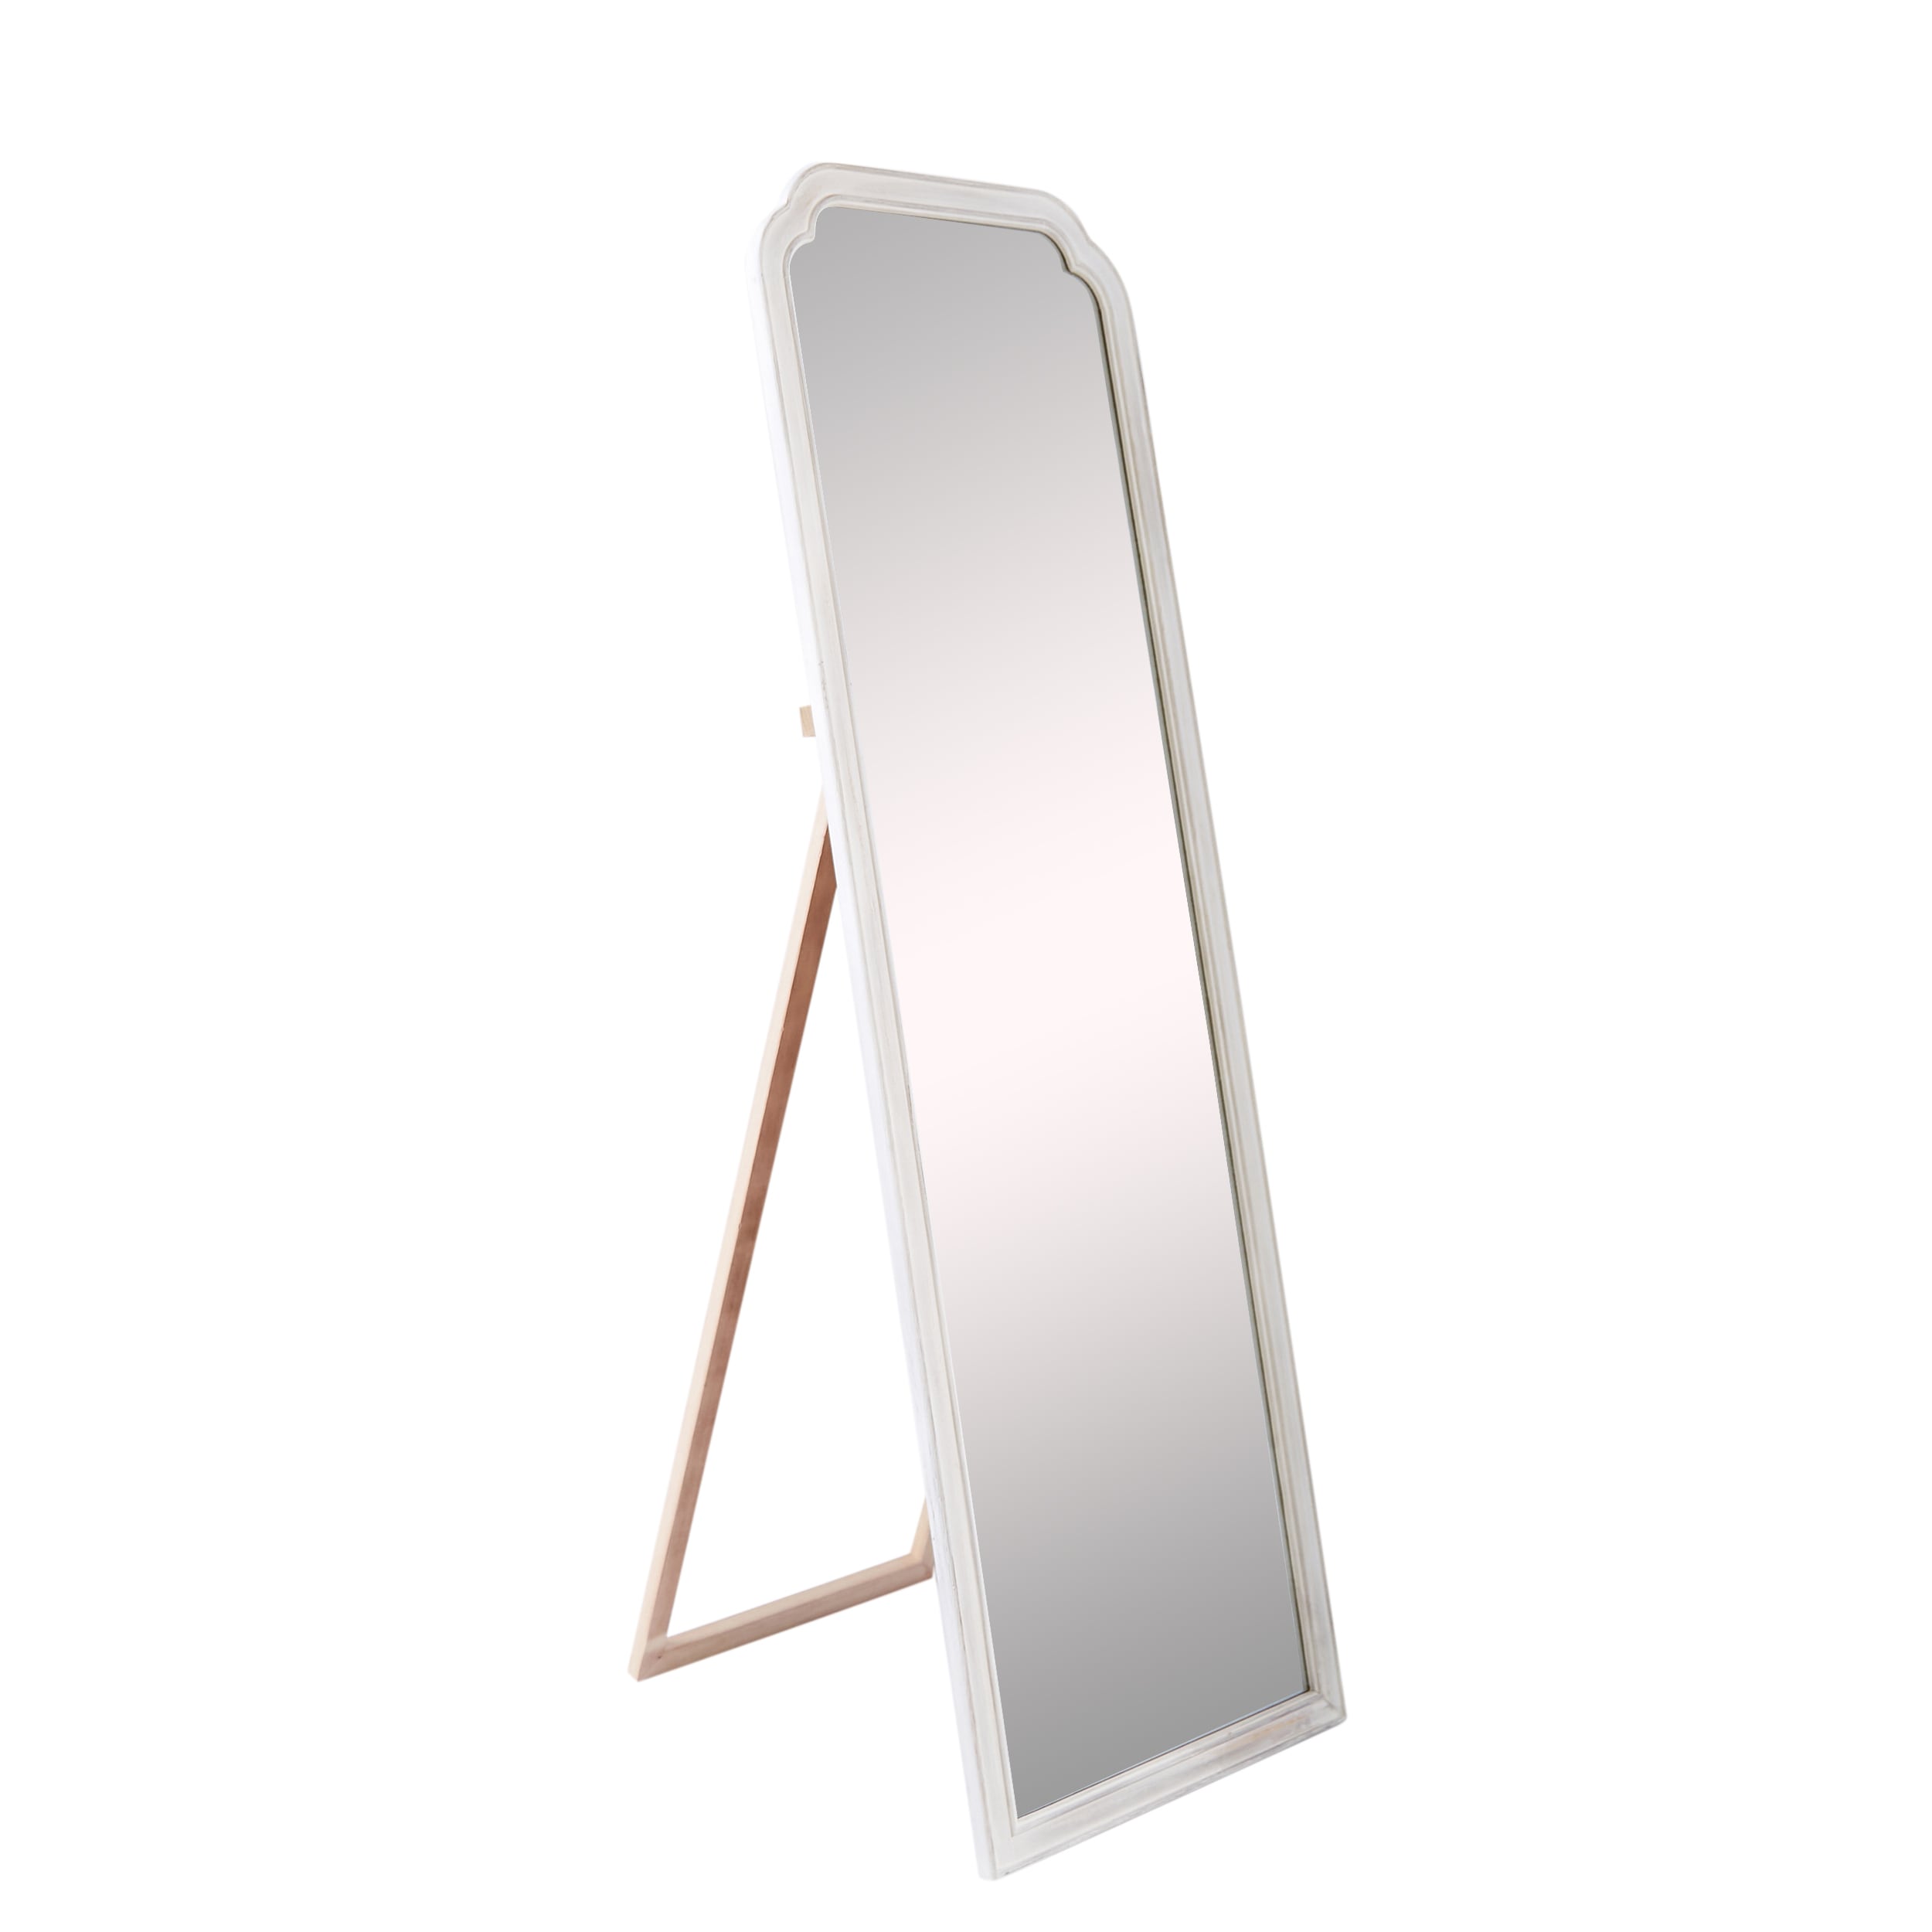 Head West Full Size Free Standing Easel Dressing Mirror 18 x 64 / Brushed Nickel